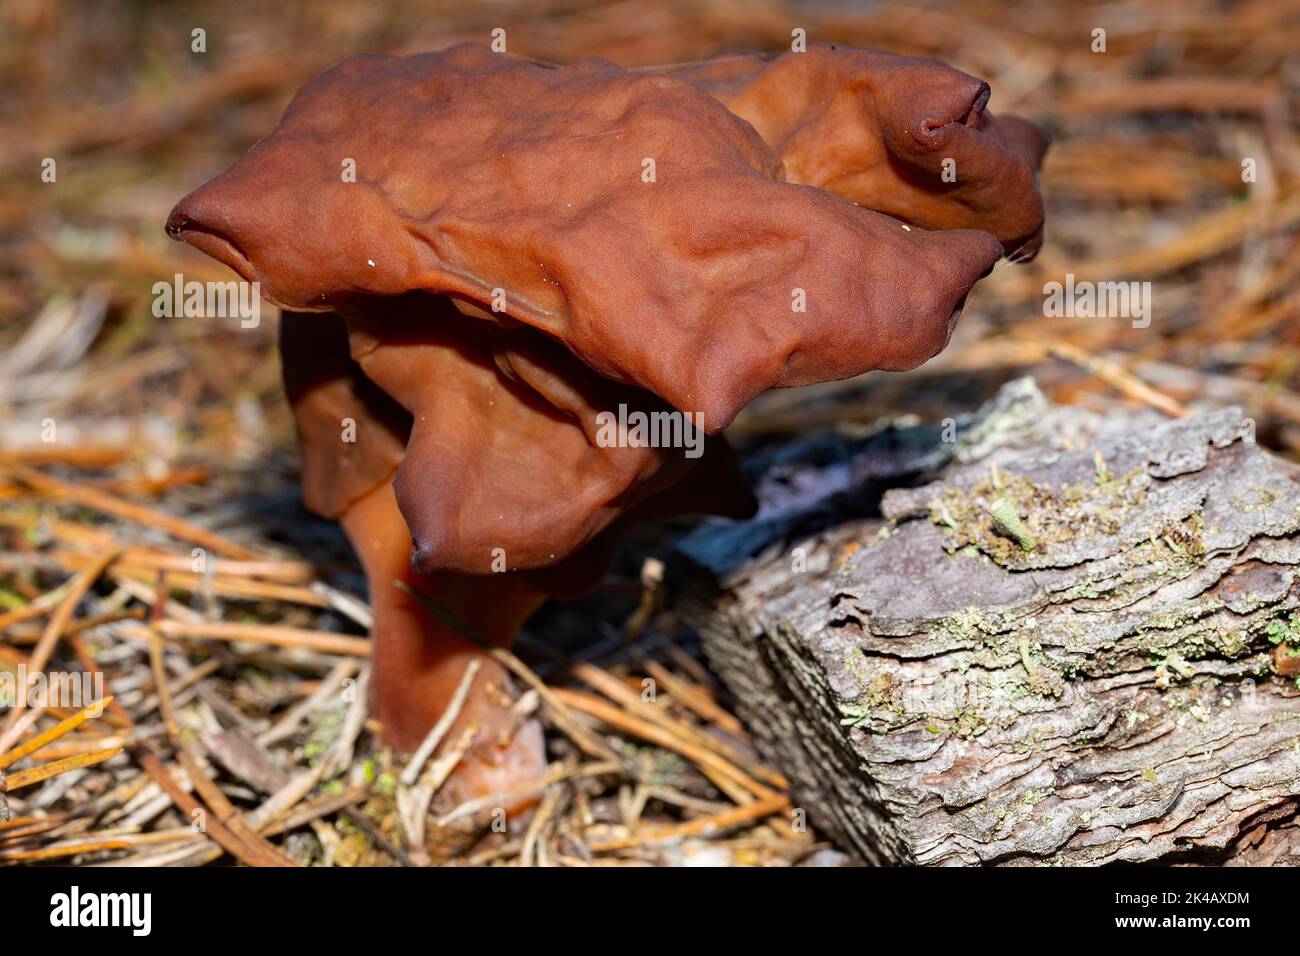 Bishop's bonnet fruit body brown stem and lobed brown cap in needle litter Stock Photo